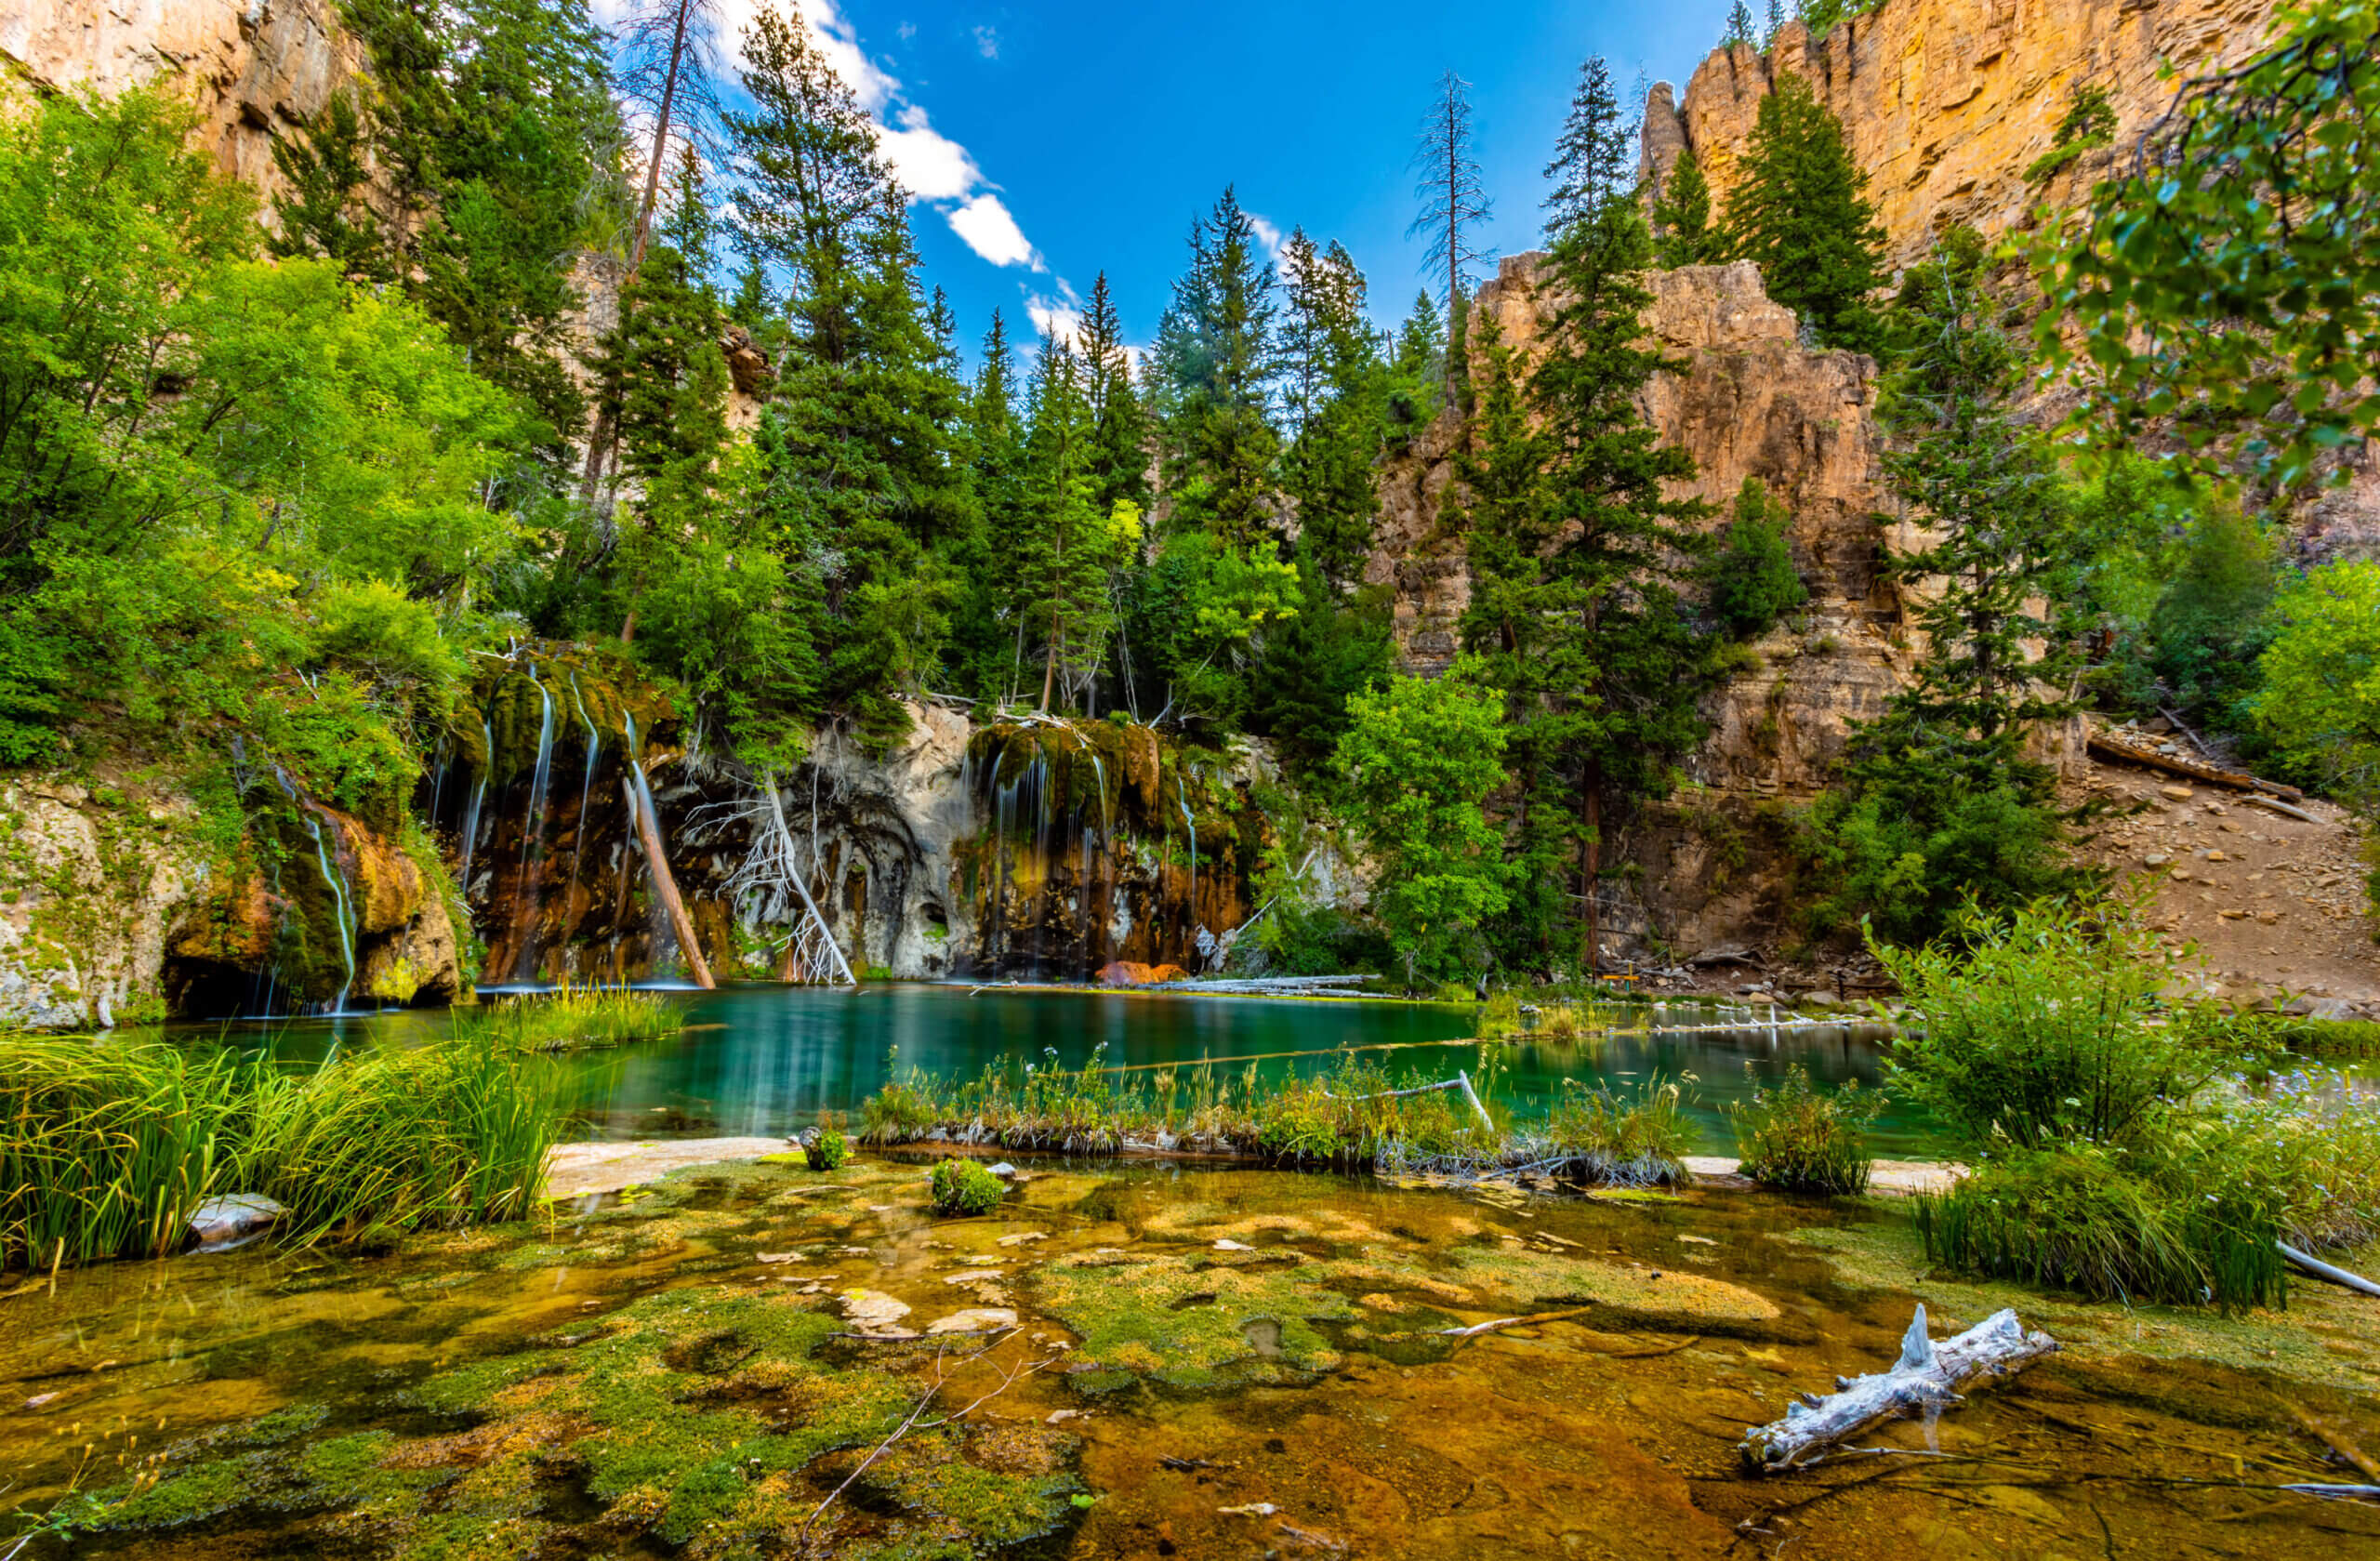 Captured in this image is Hanging Lake in Glenwood Canyon, where vibrant colors dominate the scene with brilliant shades of green.